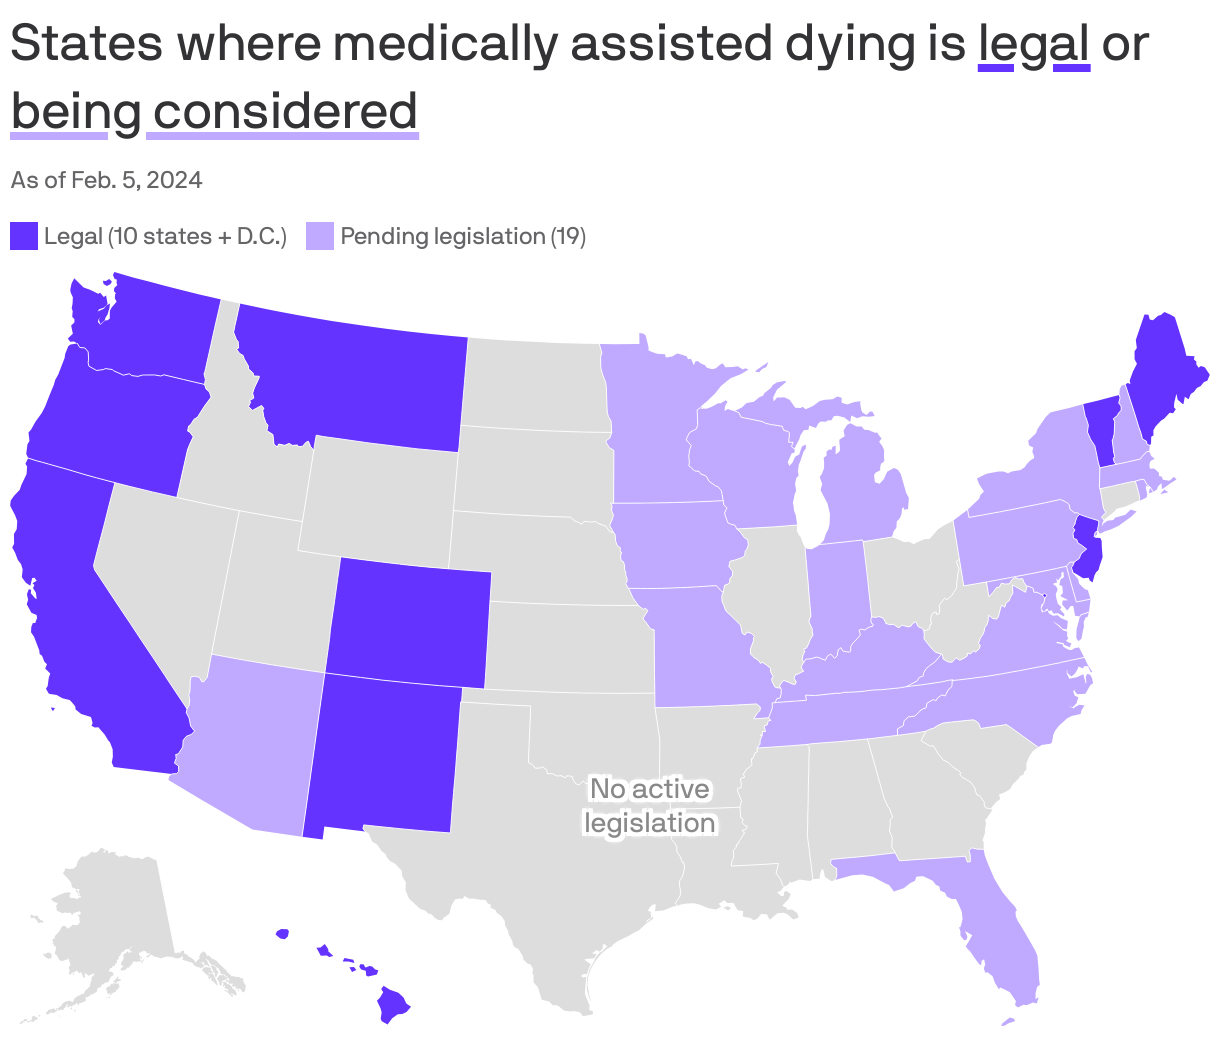 States where medically assisted dying is <span style="text-decoration:underline; text-decoration-color:#6533ff; text-decoration-thickness:4px;">legal</span> or <span style="text-decoration:underline; text-decoration-color:#c0aaff;text-decoration-thickness:4px;">being considered</span>